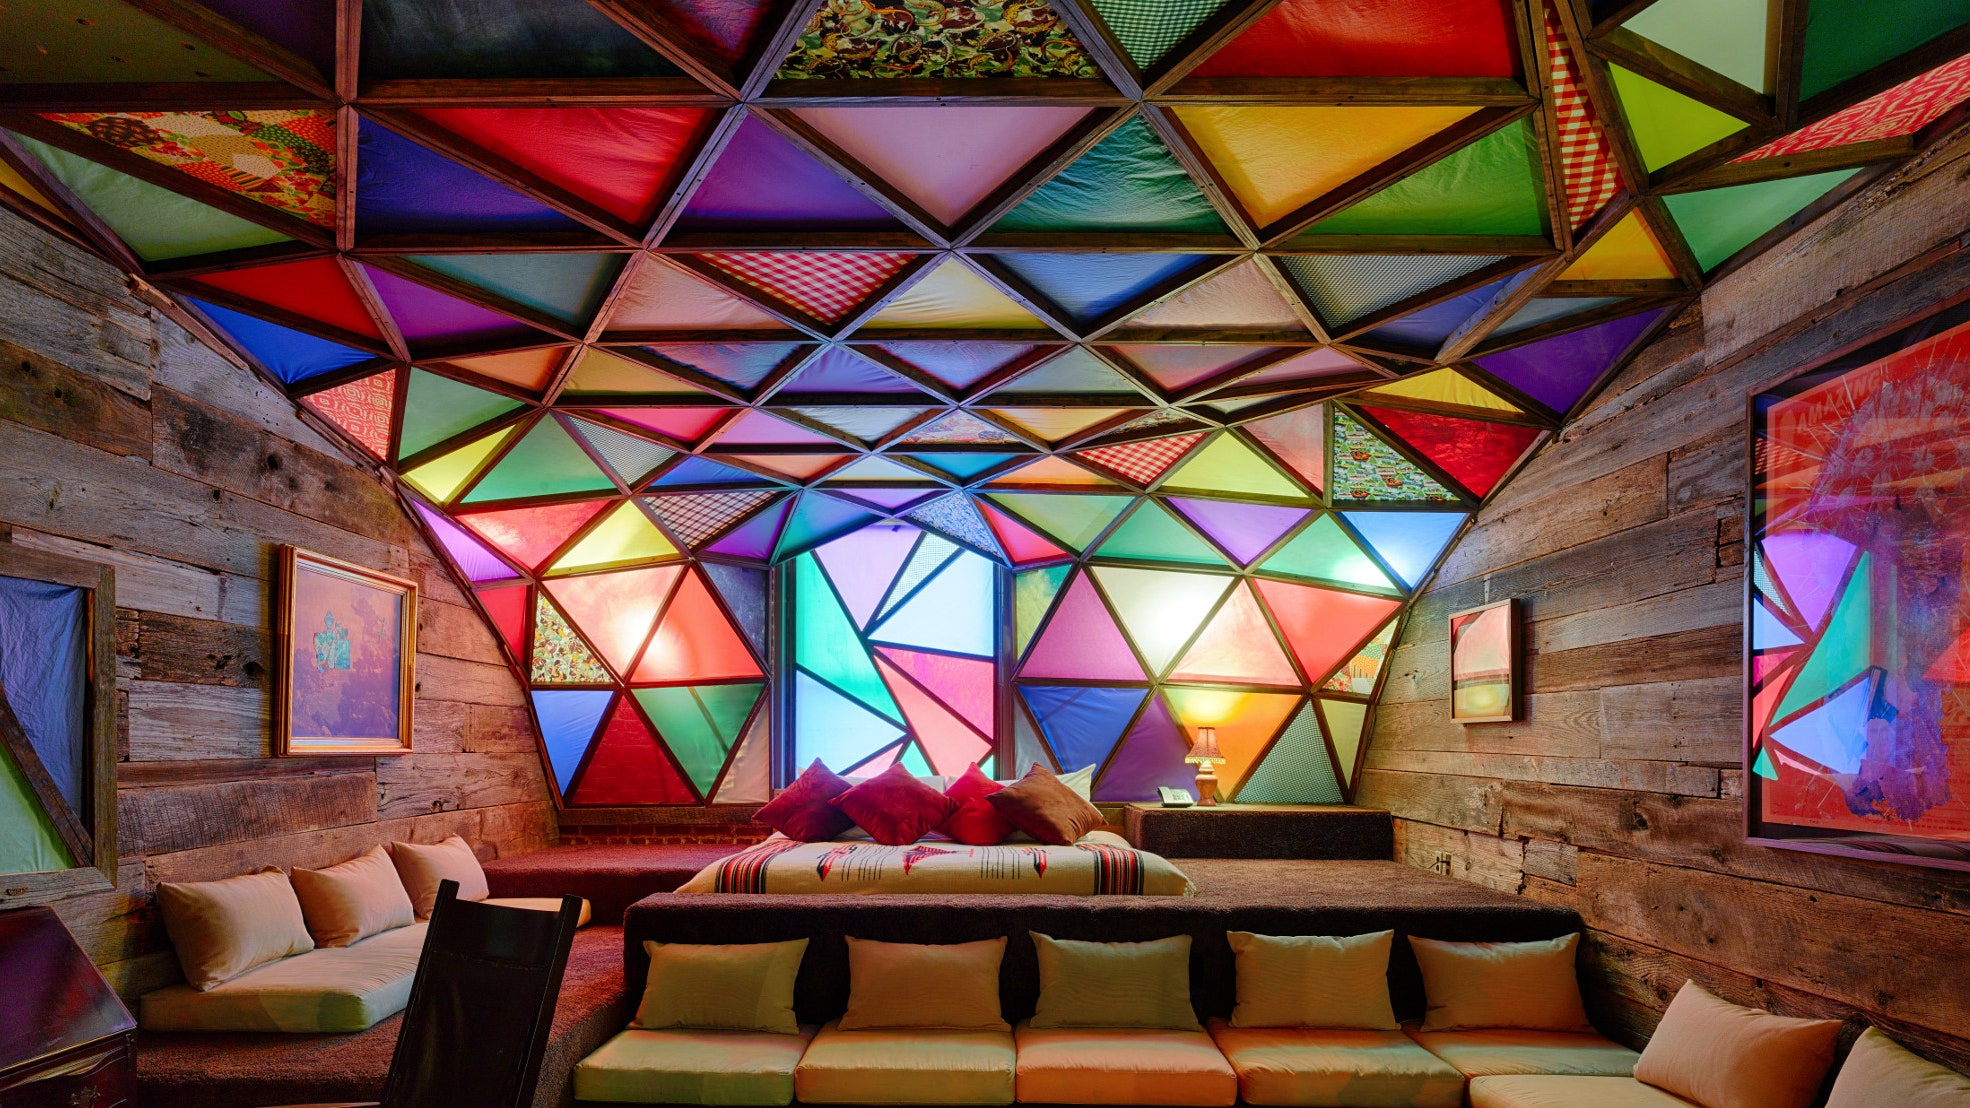 Move over ace hotels c is the new artsy it spot condã nast traveler